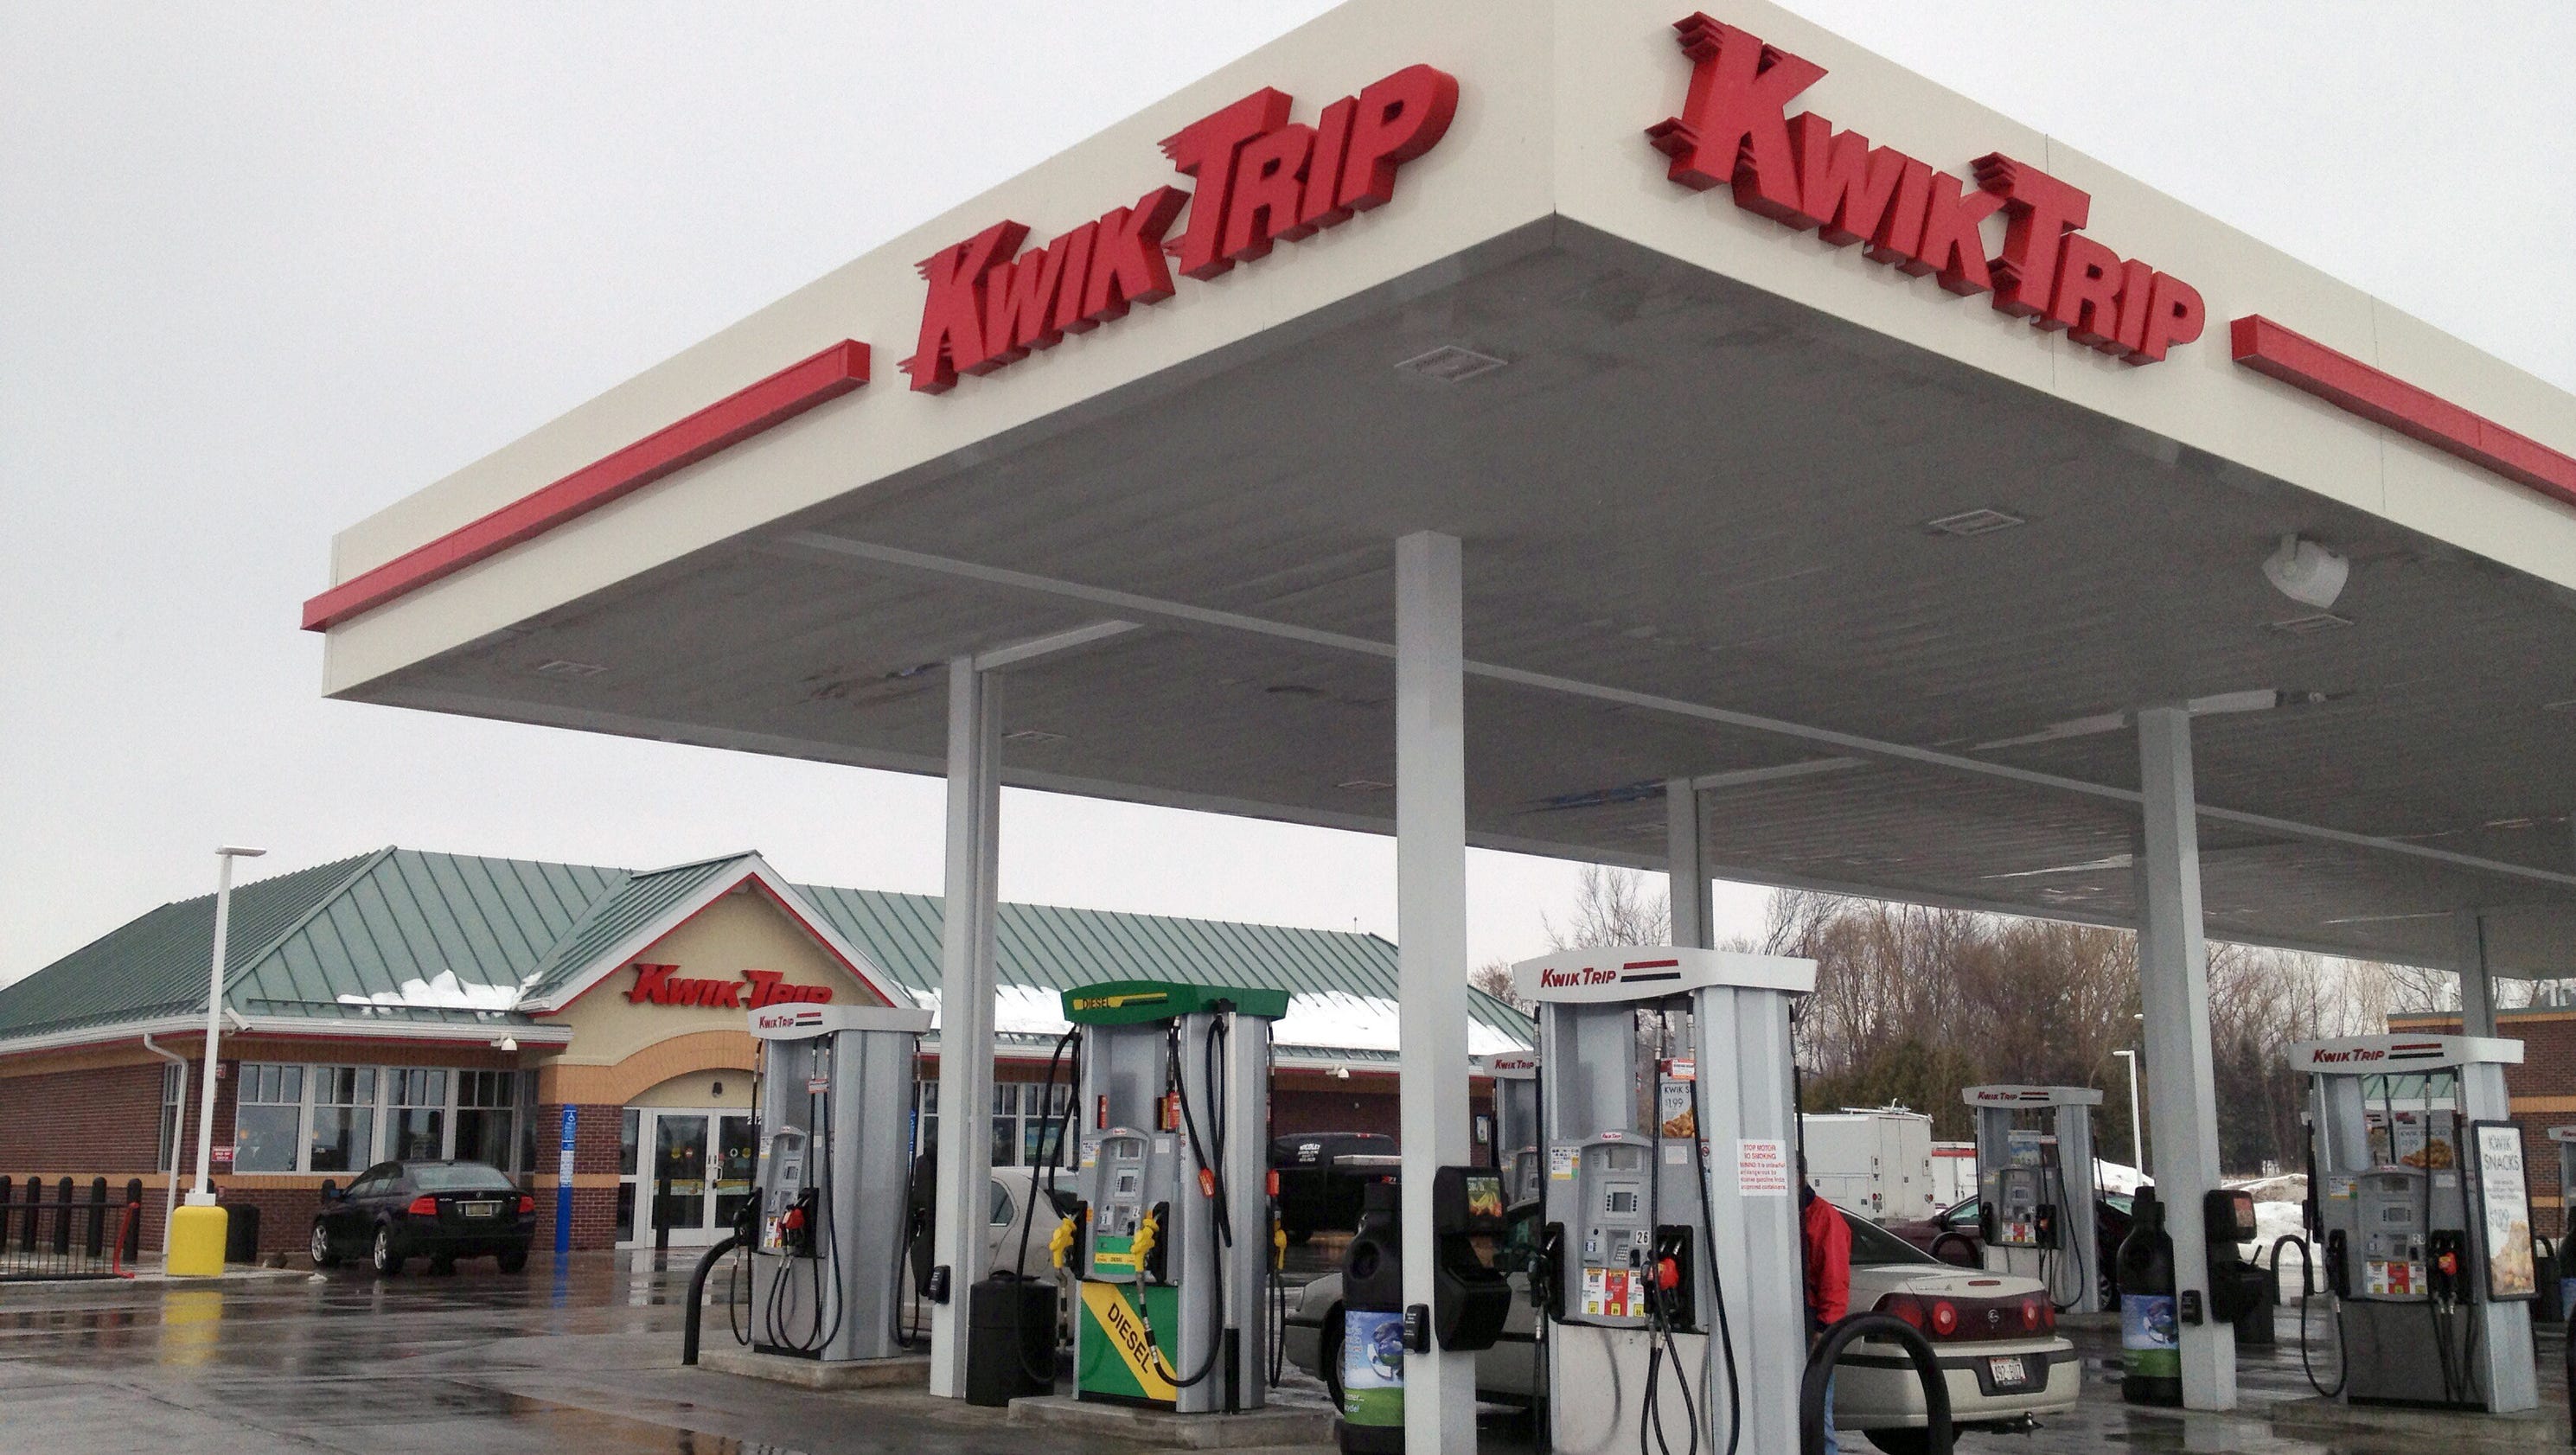 Wjfw Deals Kwik Trip Is A Family Owned Gas Station And Convenience Chain Founded In 1965 Of S